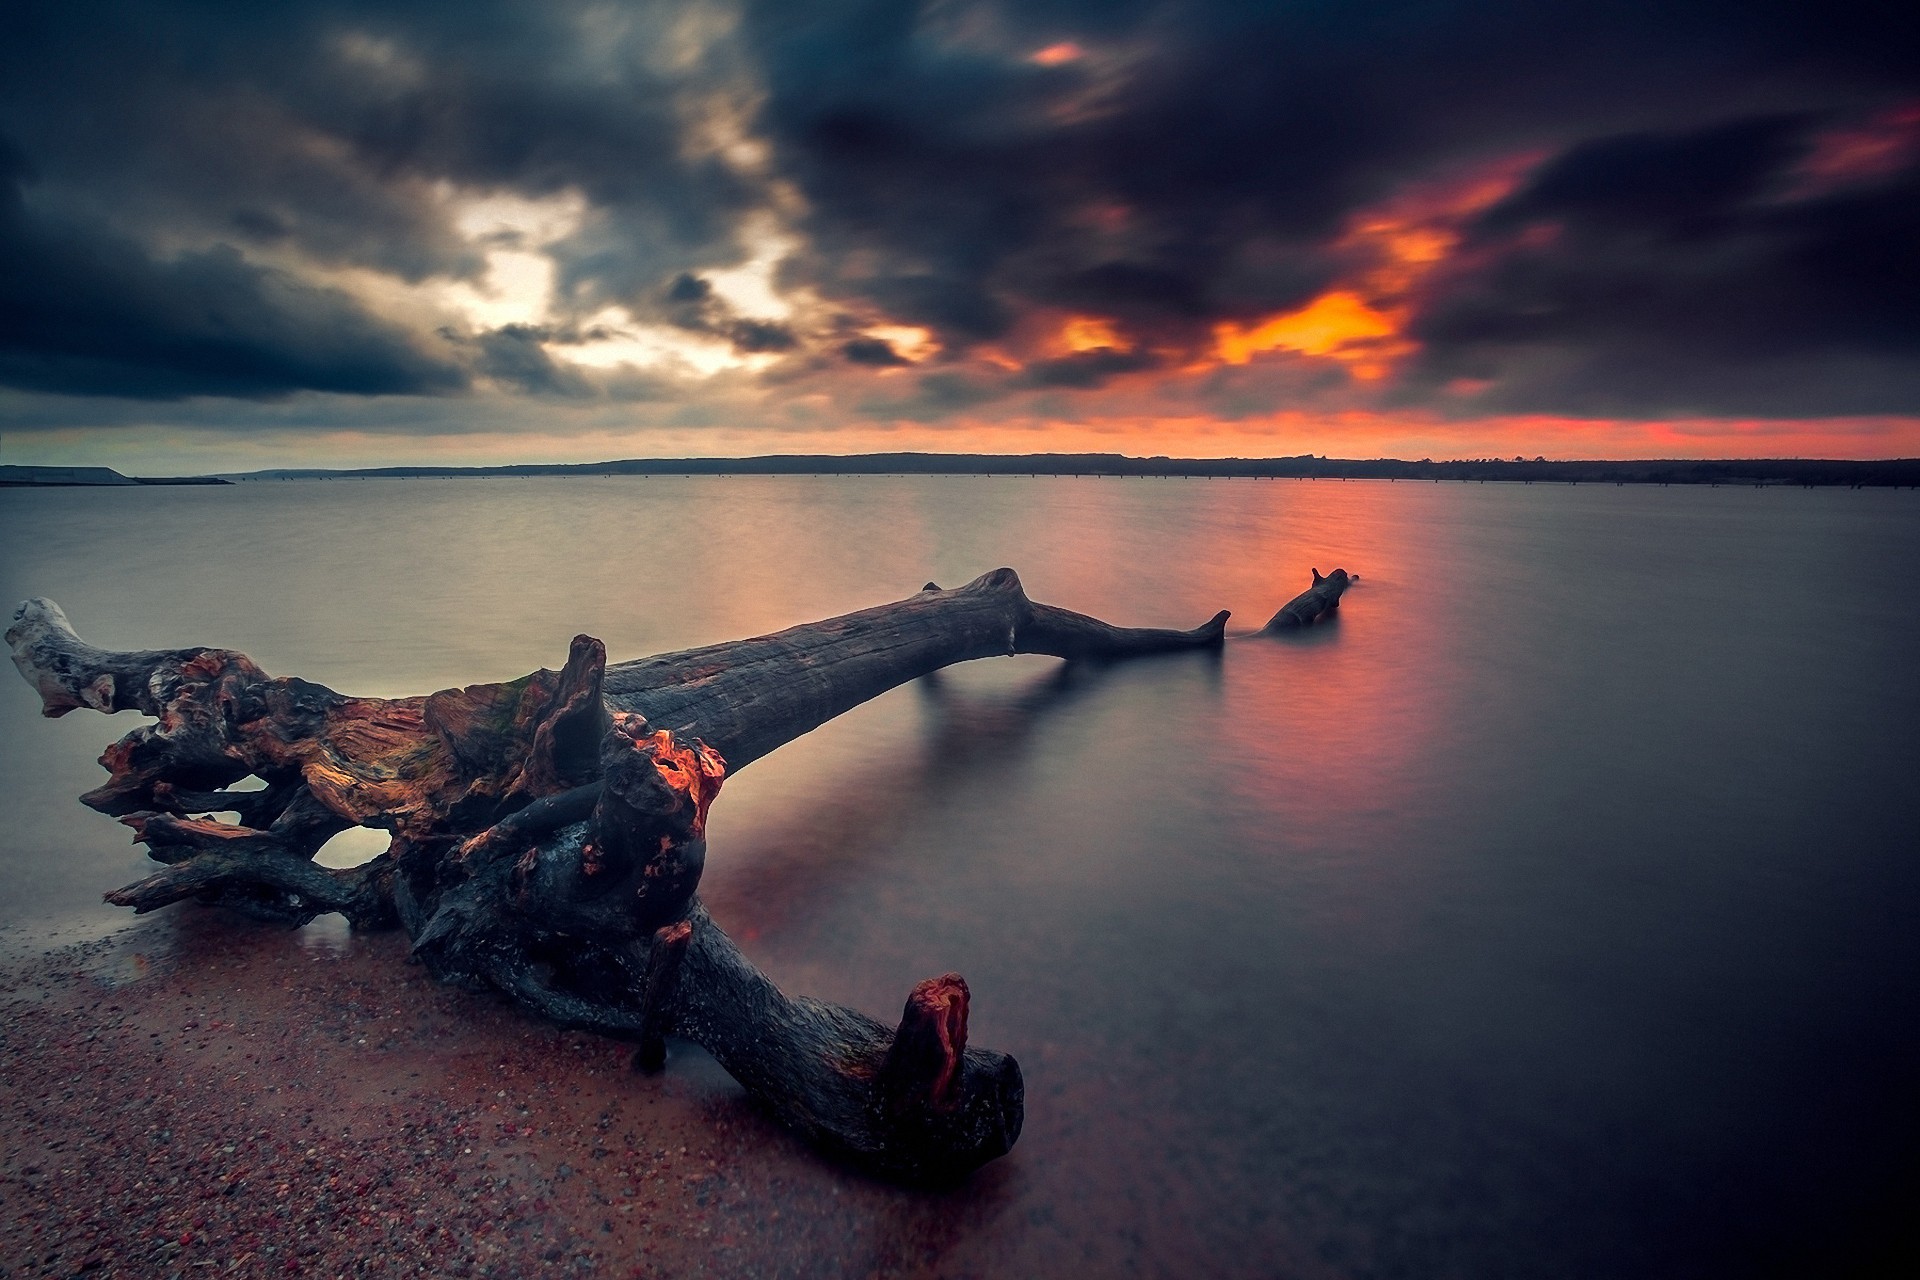 General 1920x1280 landscape beach sunset dead trees skyscape nature sky wood water